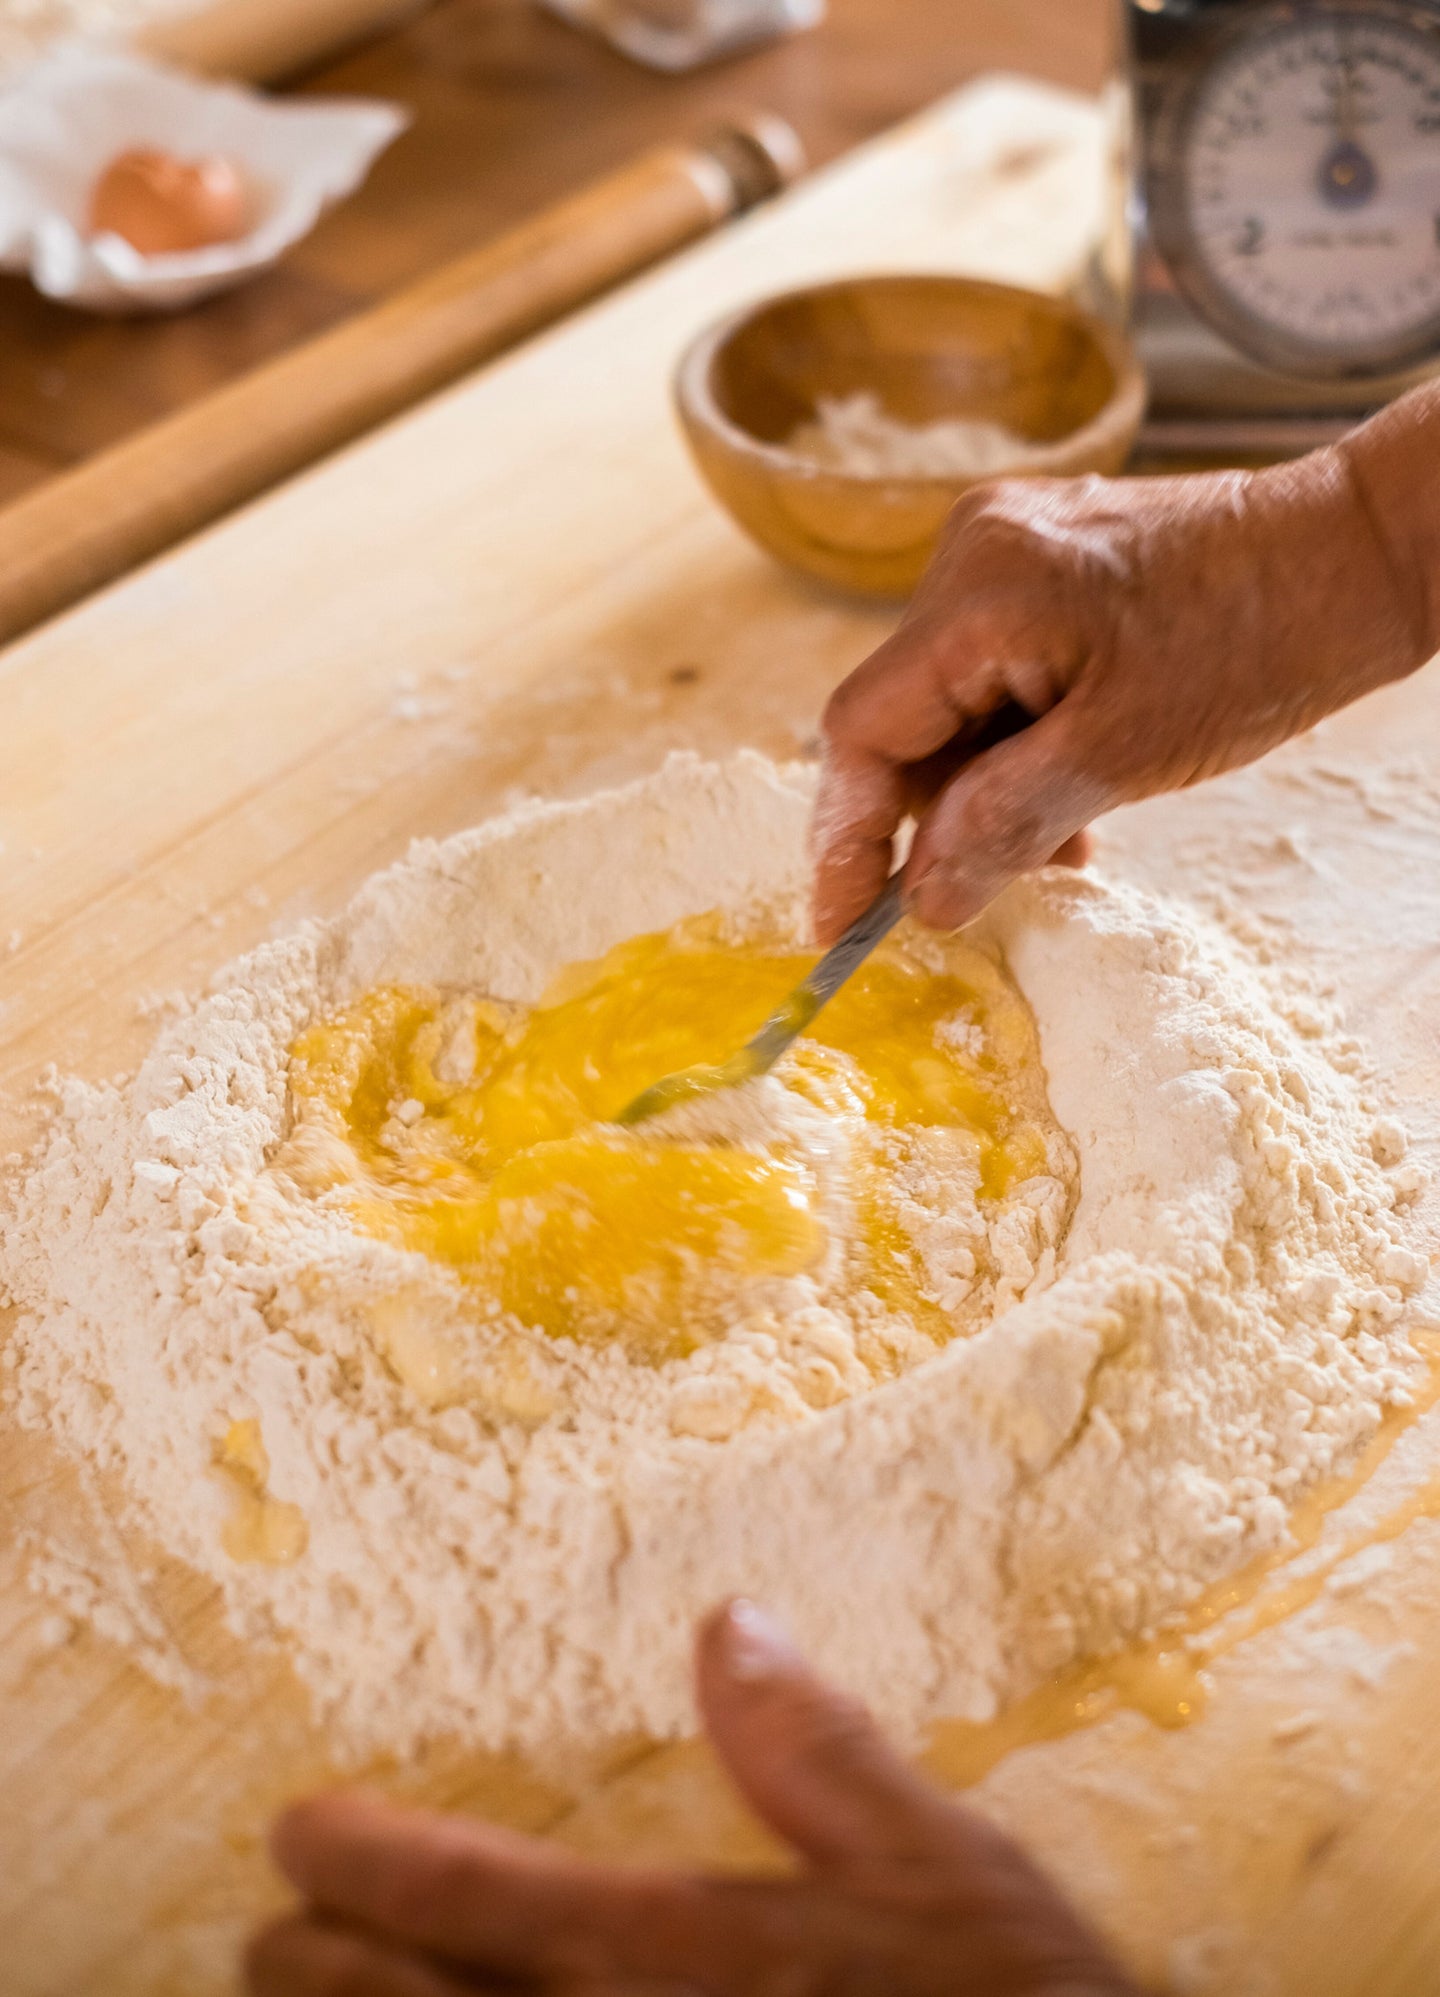 flour and egg well for pasta